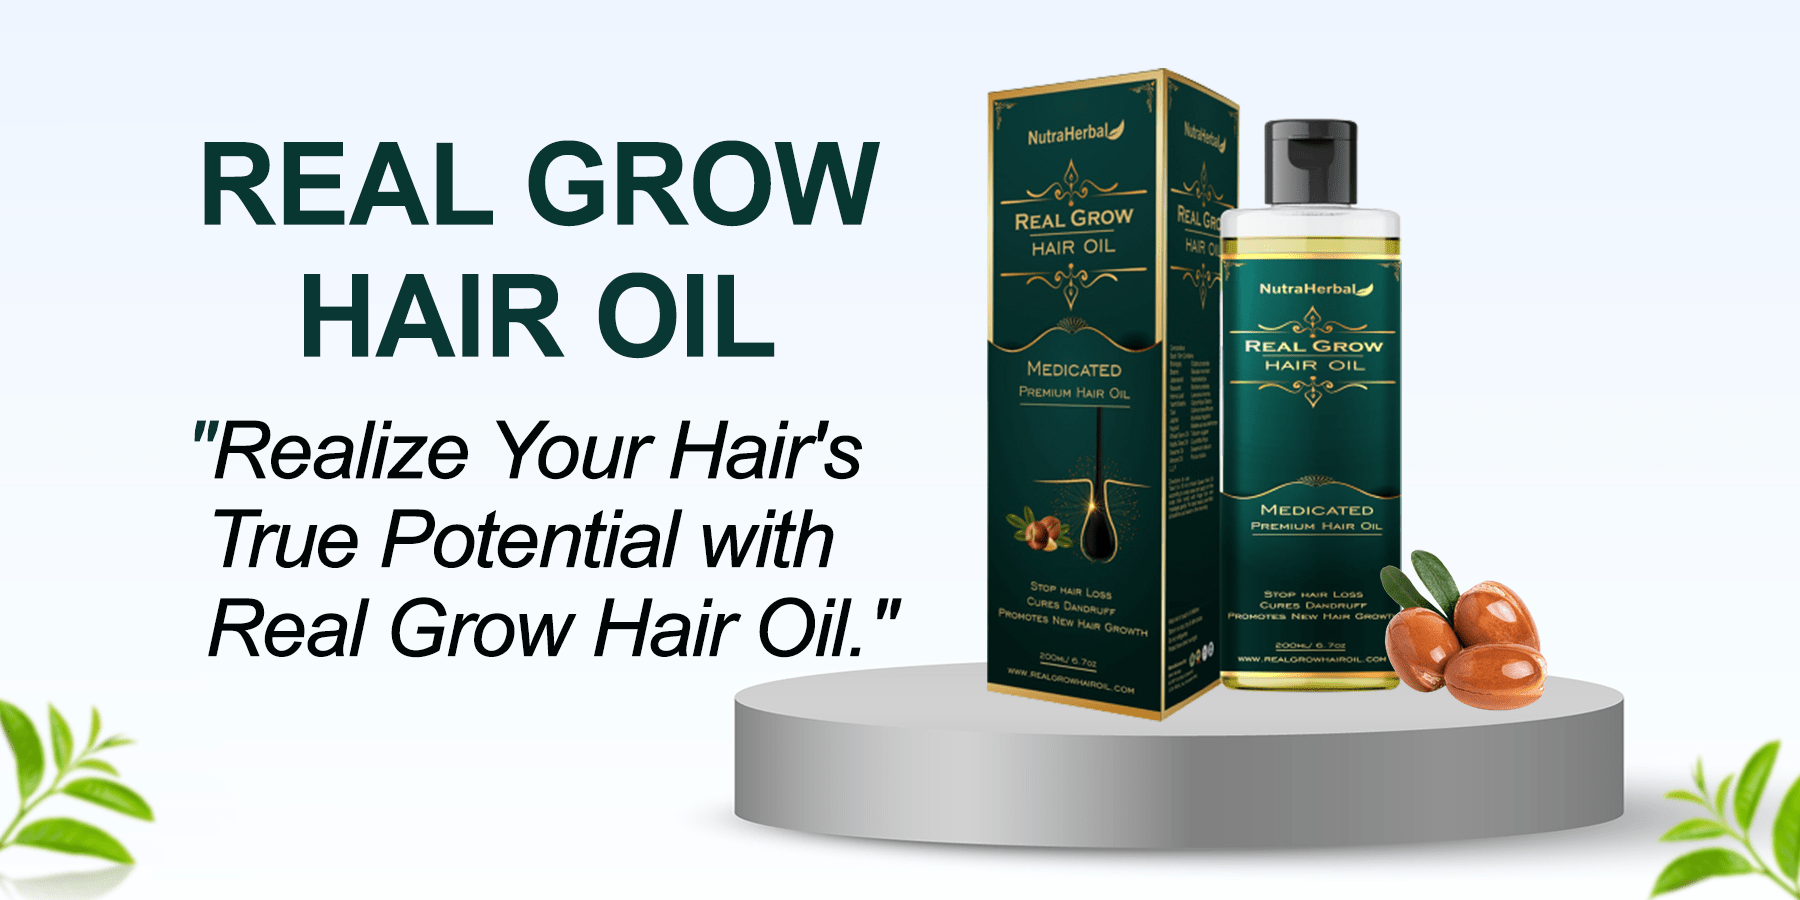 Real Grow Hair Oil Manufacturers